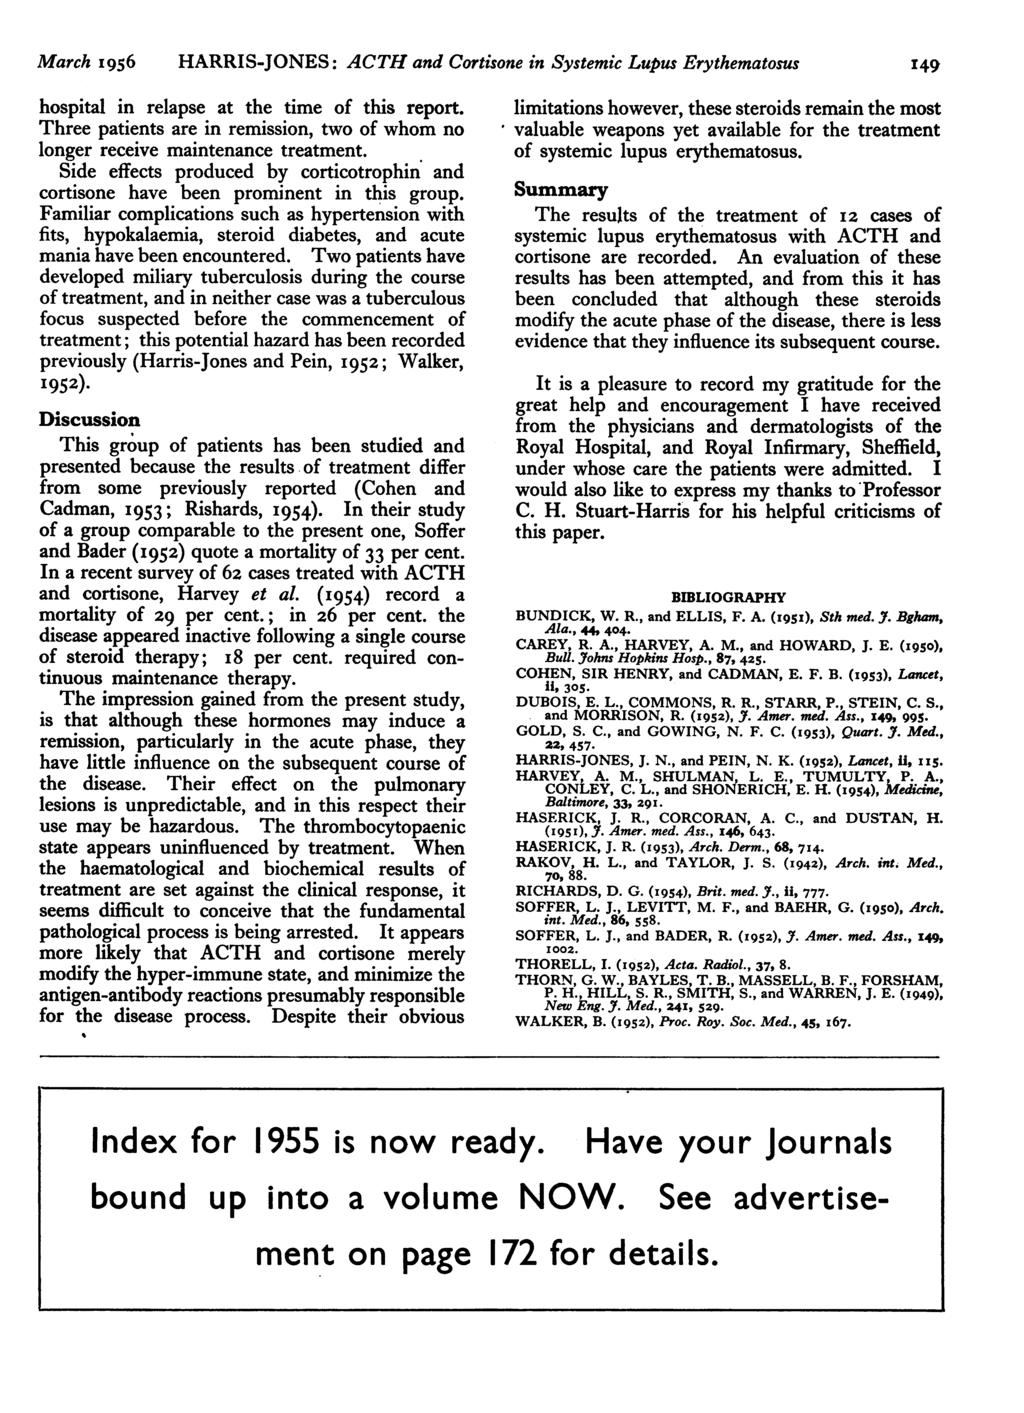 March 1956 HARRIS-JONES: ACTH and Cortisone in Systemic Lupus Erythematosus 1 hospital in relapse at the time of this report.